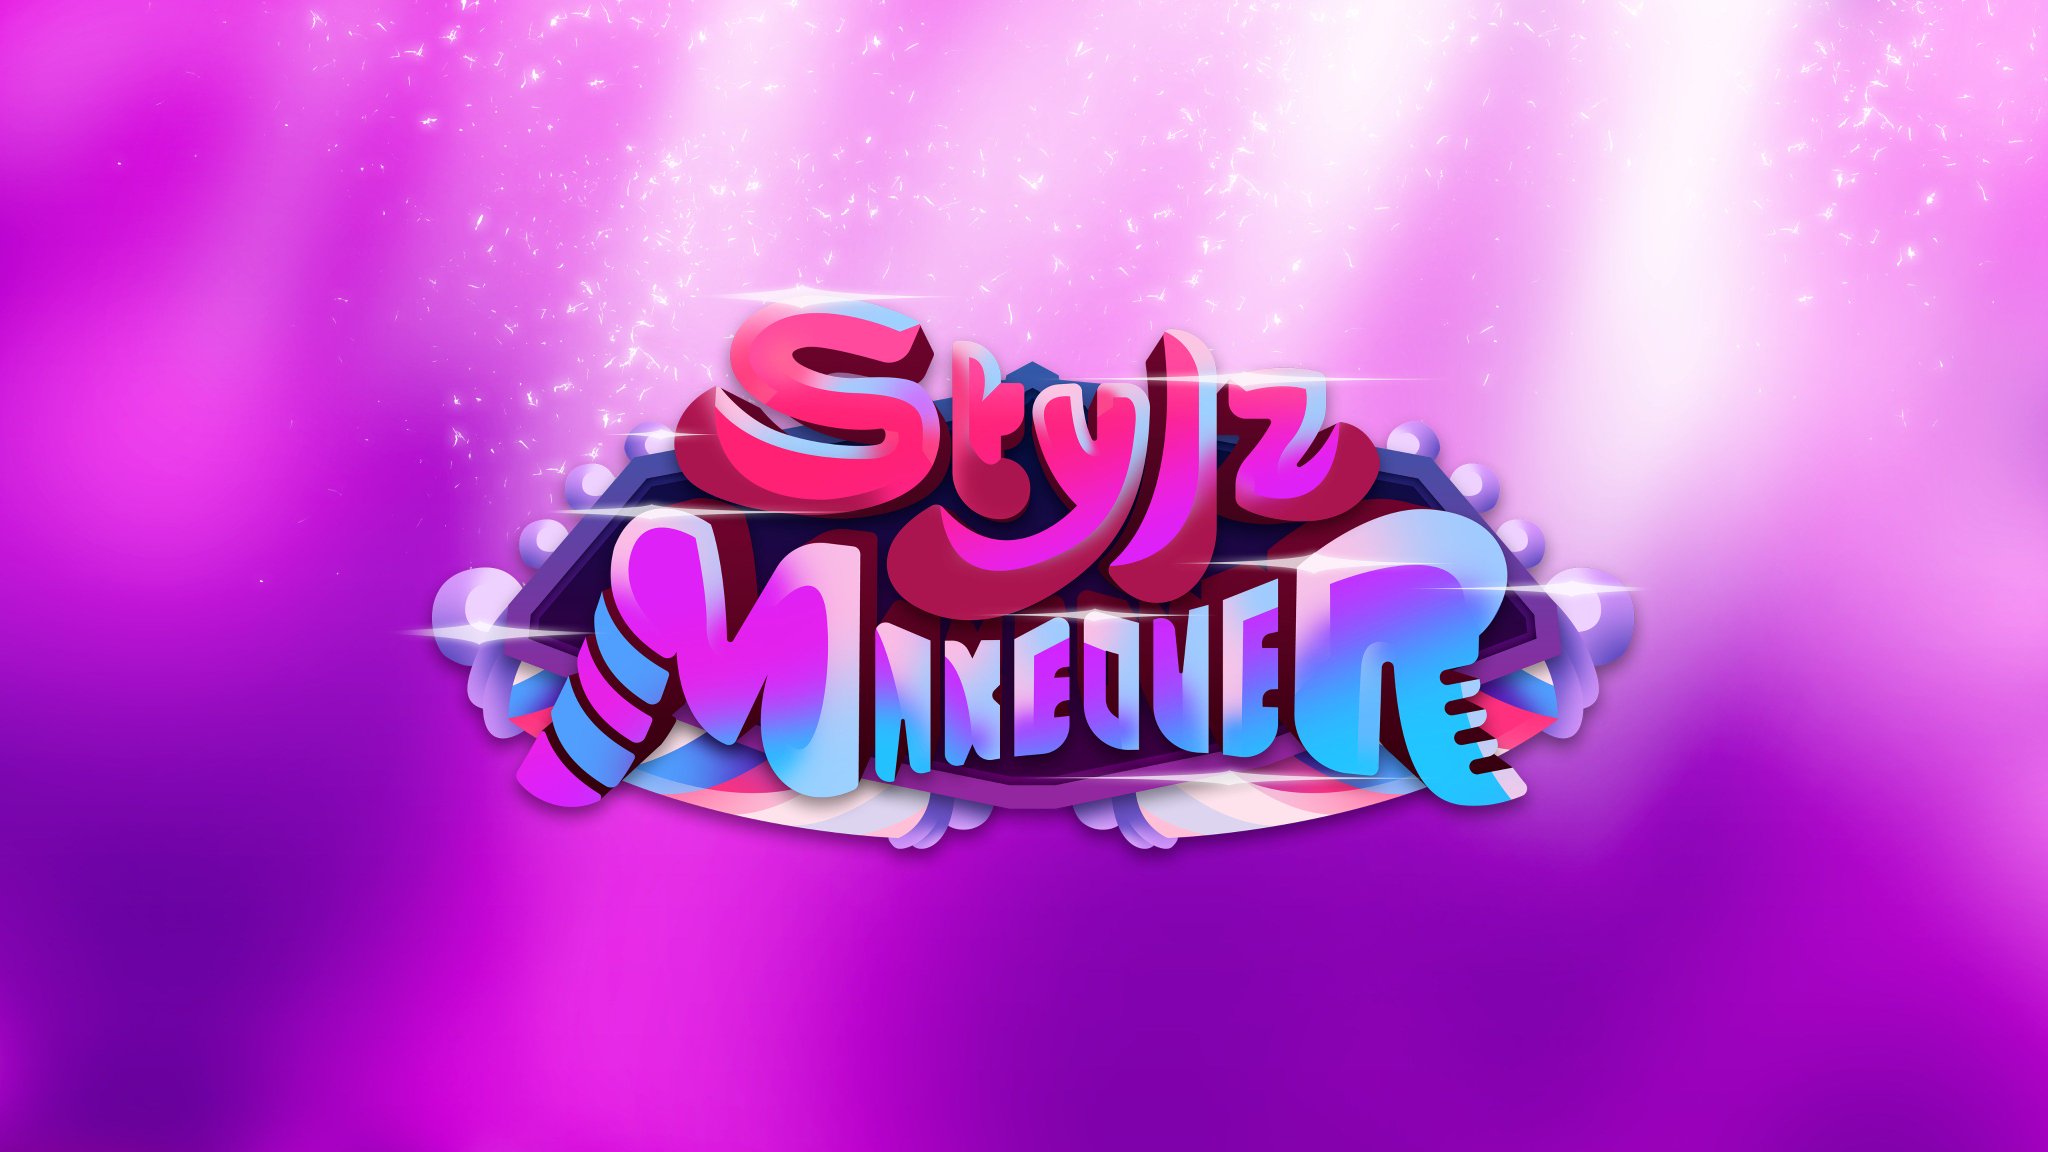 Ricky On Twitter Looking For A New Makeover Use Code Superstylish For Some Free Gems Exclusively On Roblox At The Stylz Salon Spa Https T Co Dia3gz3exm Https T Co Mkkgg7siwg - roblox salon and spa makeover